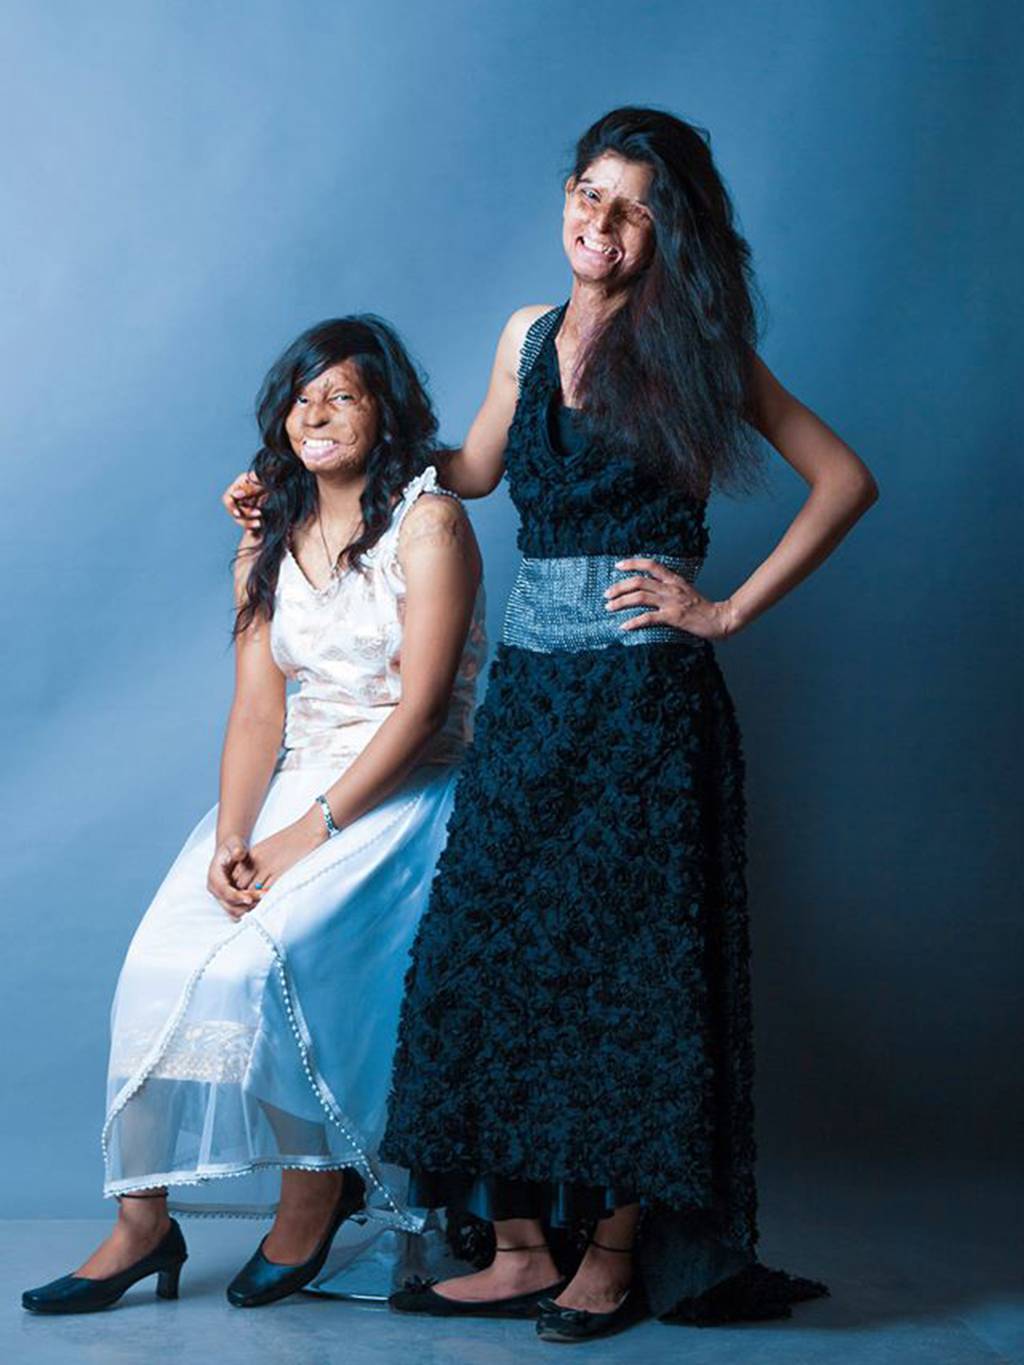 redsuelo:  amberrosehairline:  myvoicemyright:   Acid attack survivors in India model